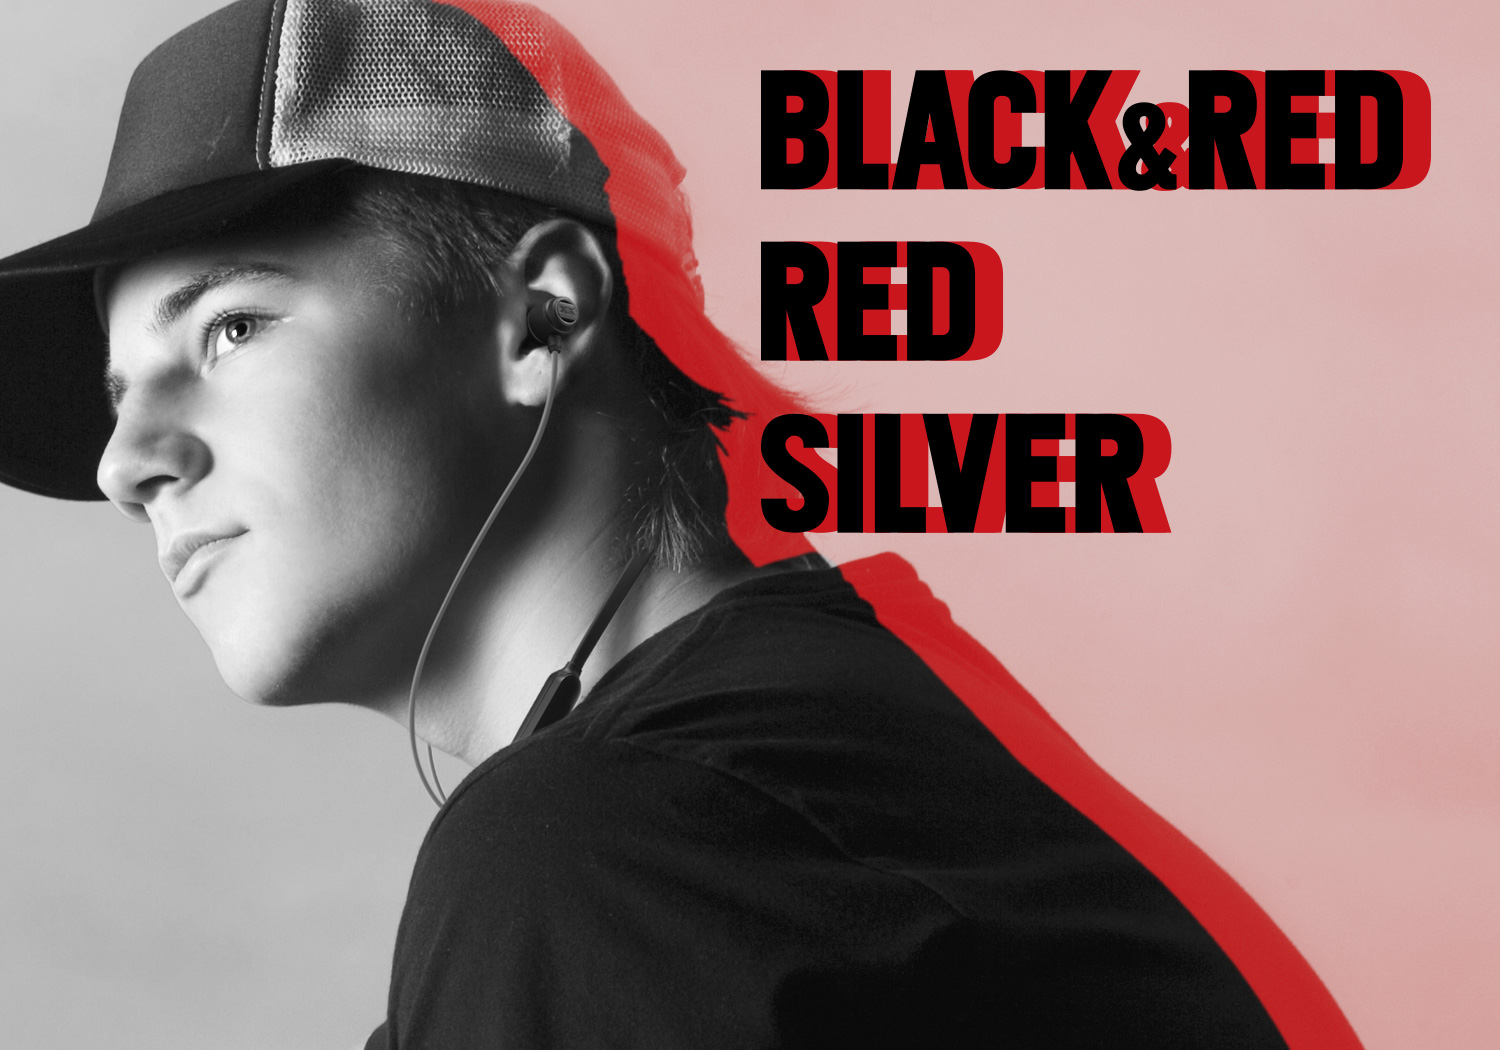 BLACKxRED, RED, SILVER